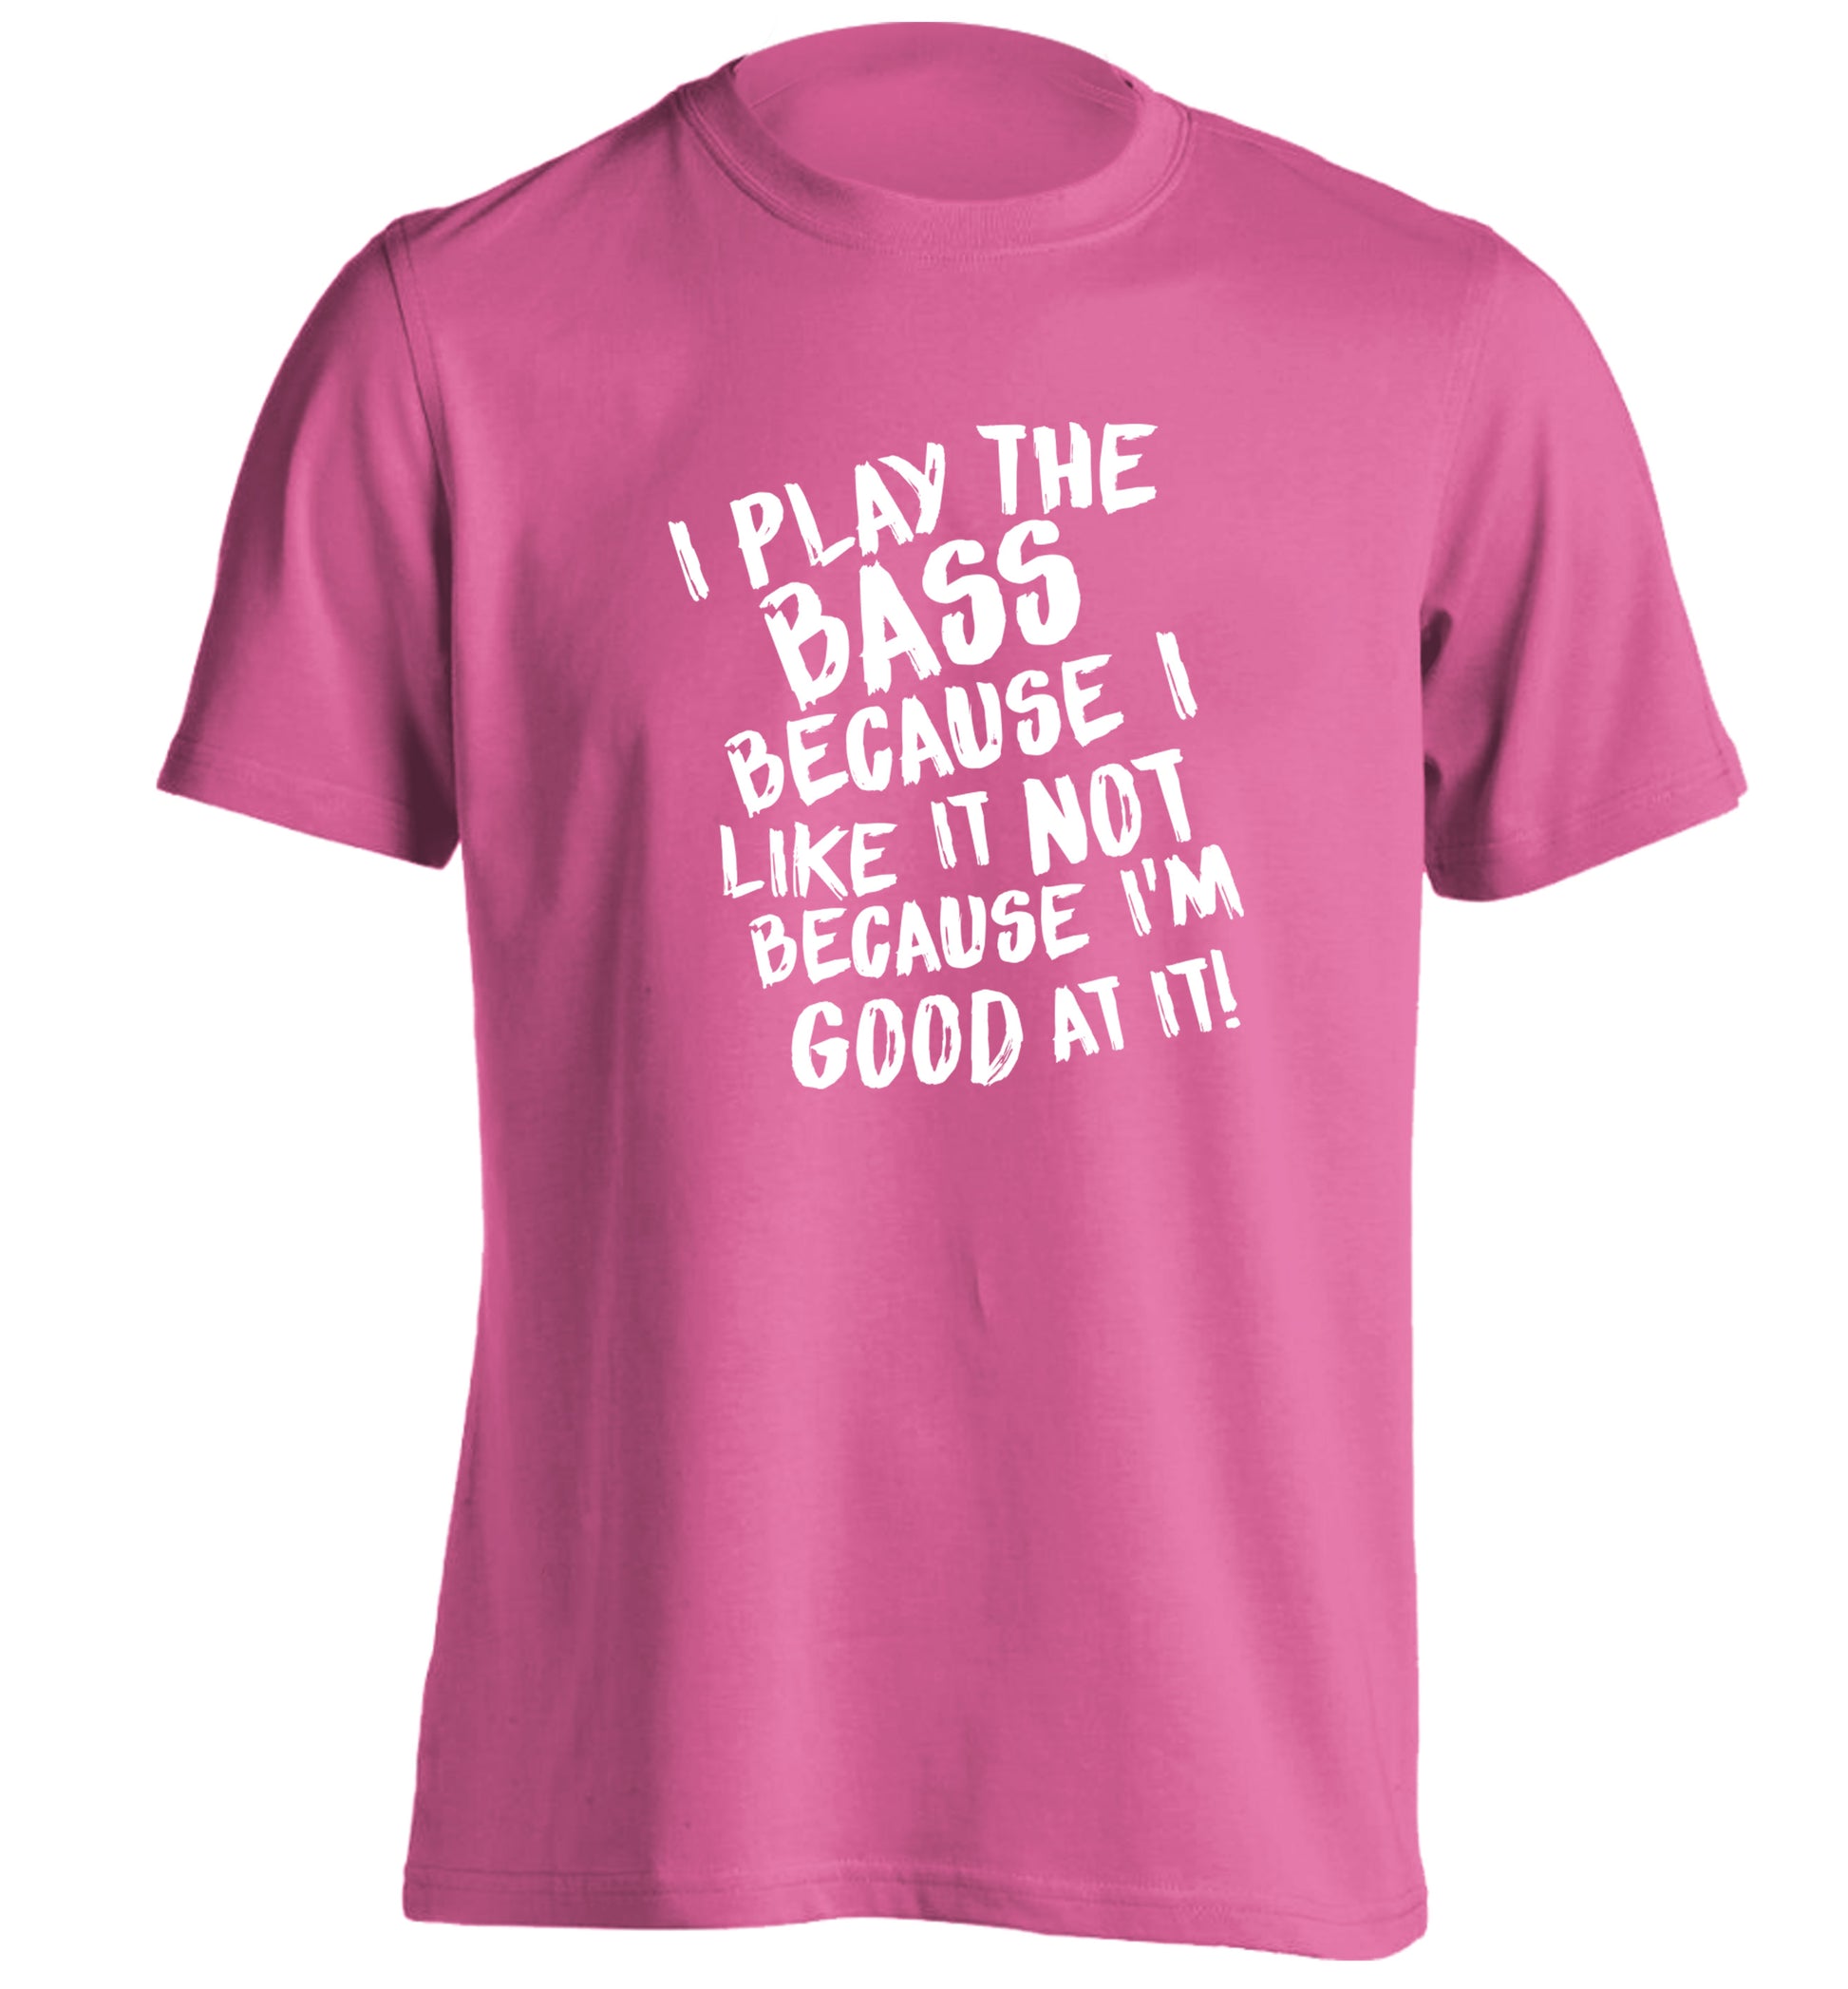 I play the bass because I like it not because I'm good at it adults unisex pink Tshirt 2XL